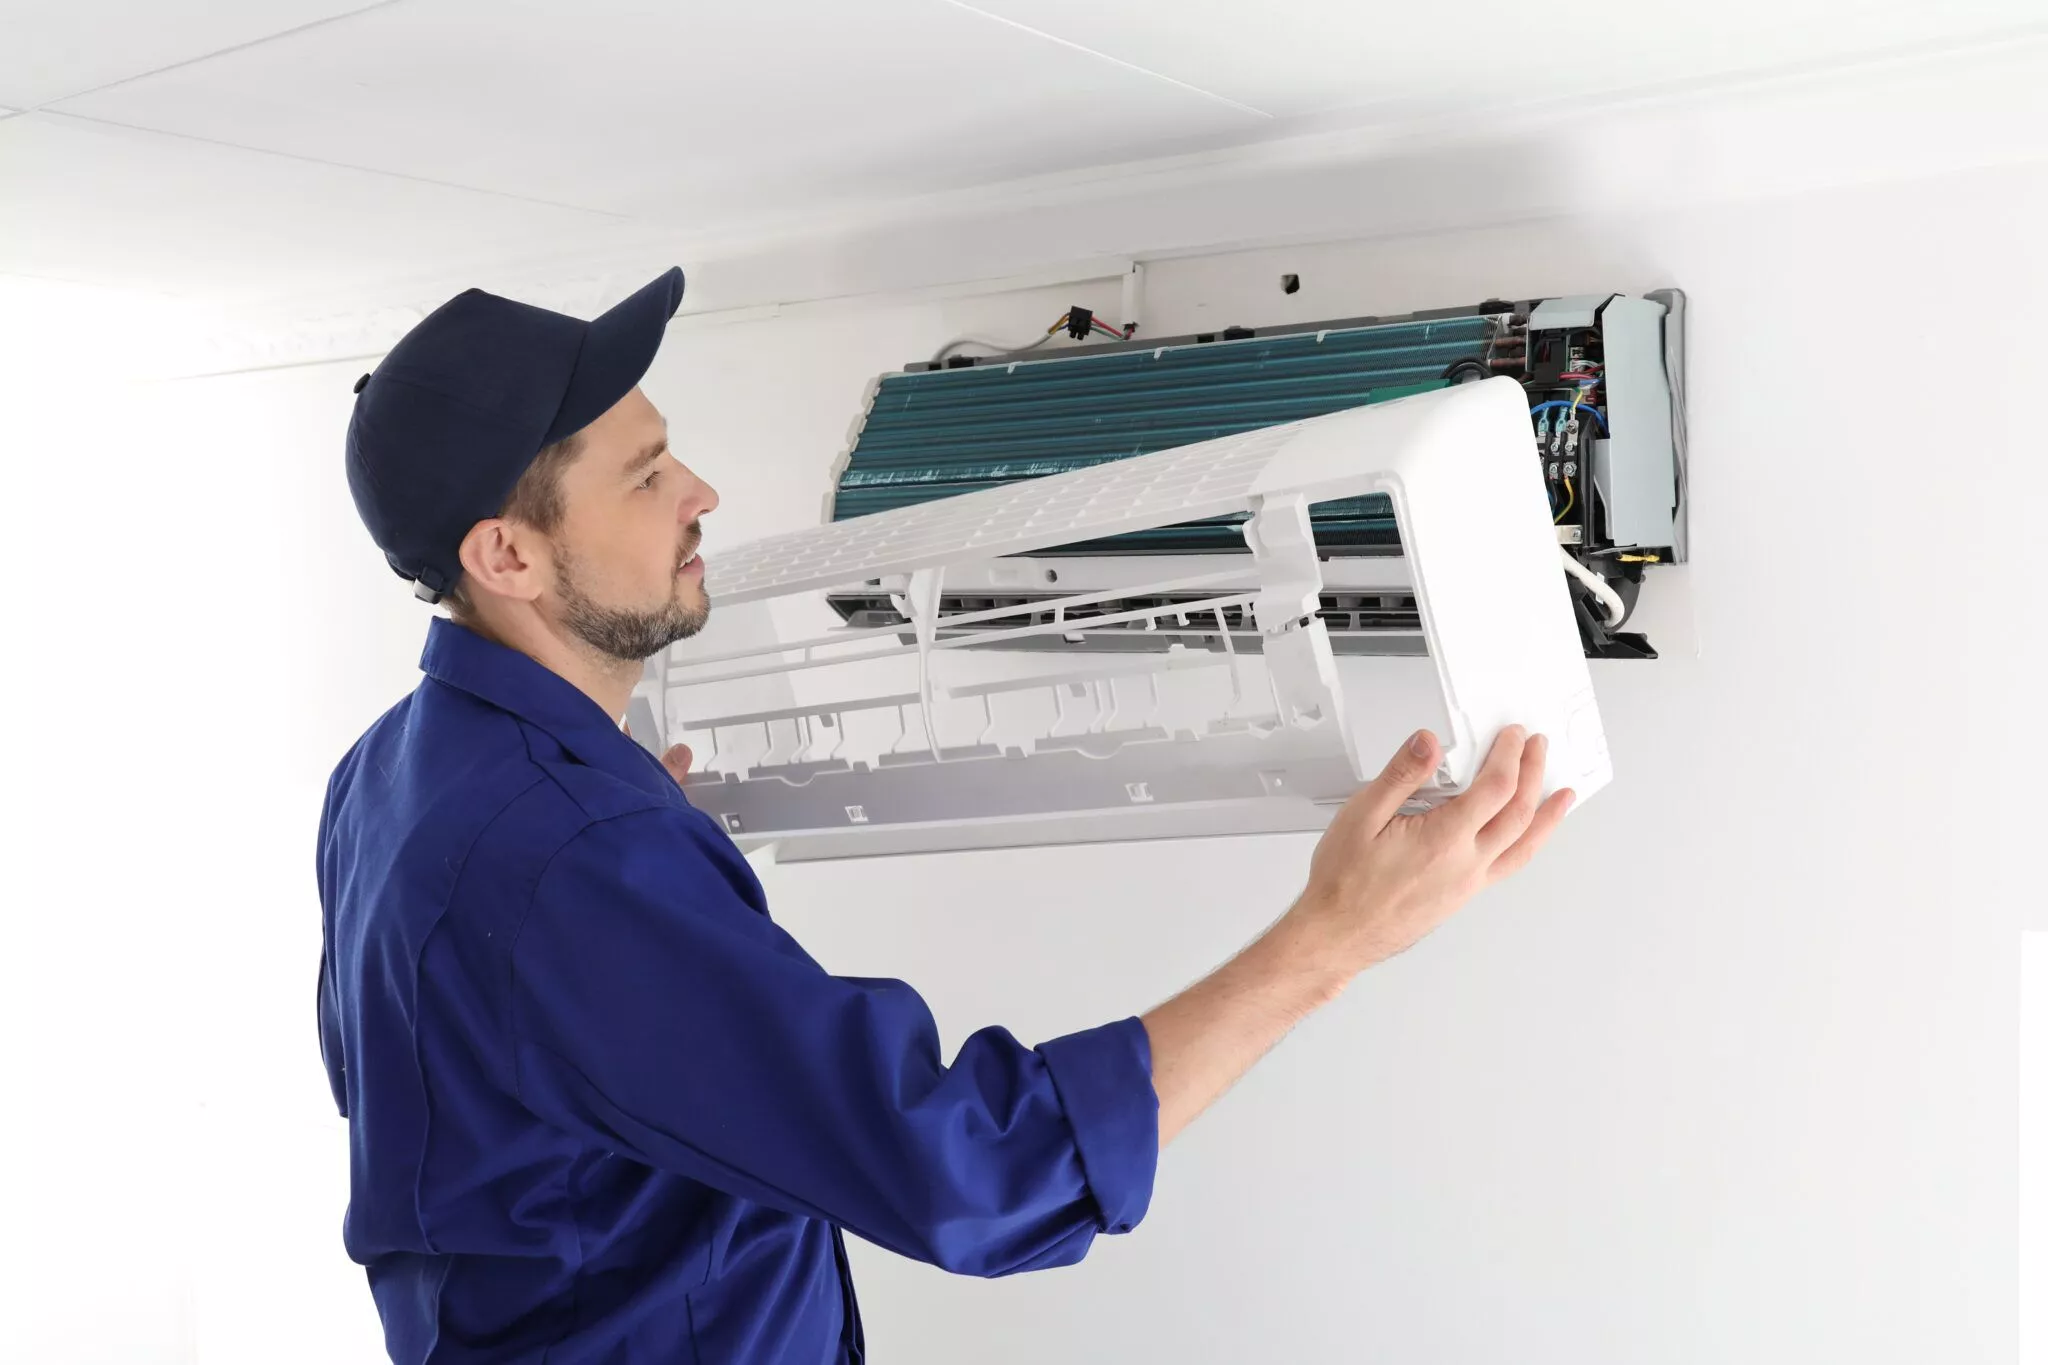 What You Need to Learn About AC’s before Doing Repairs Yourself